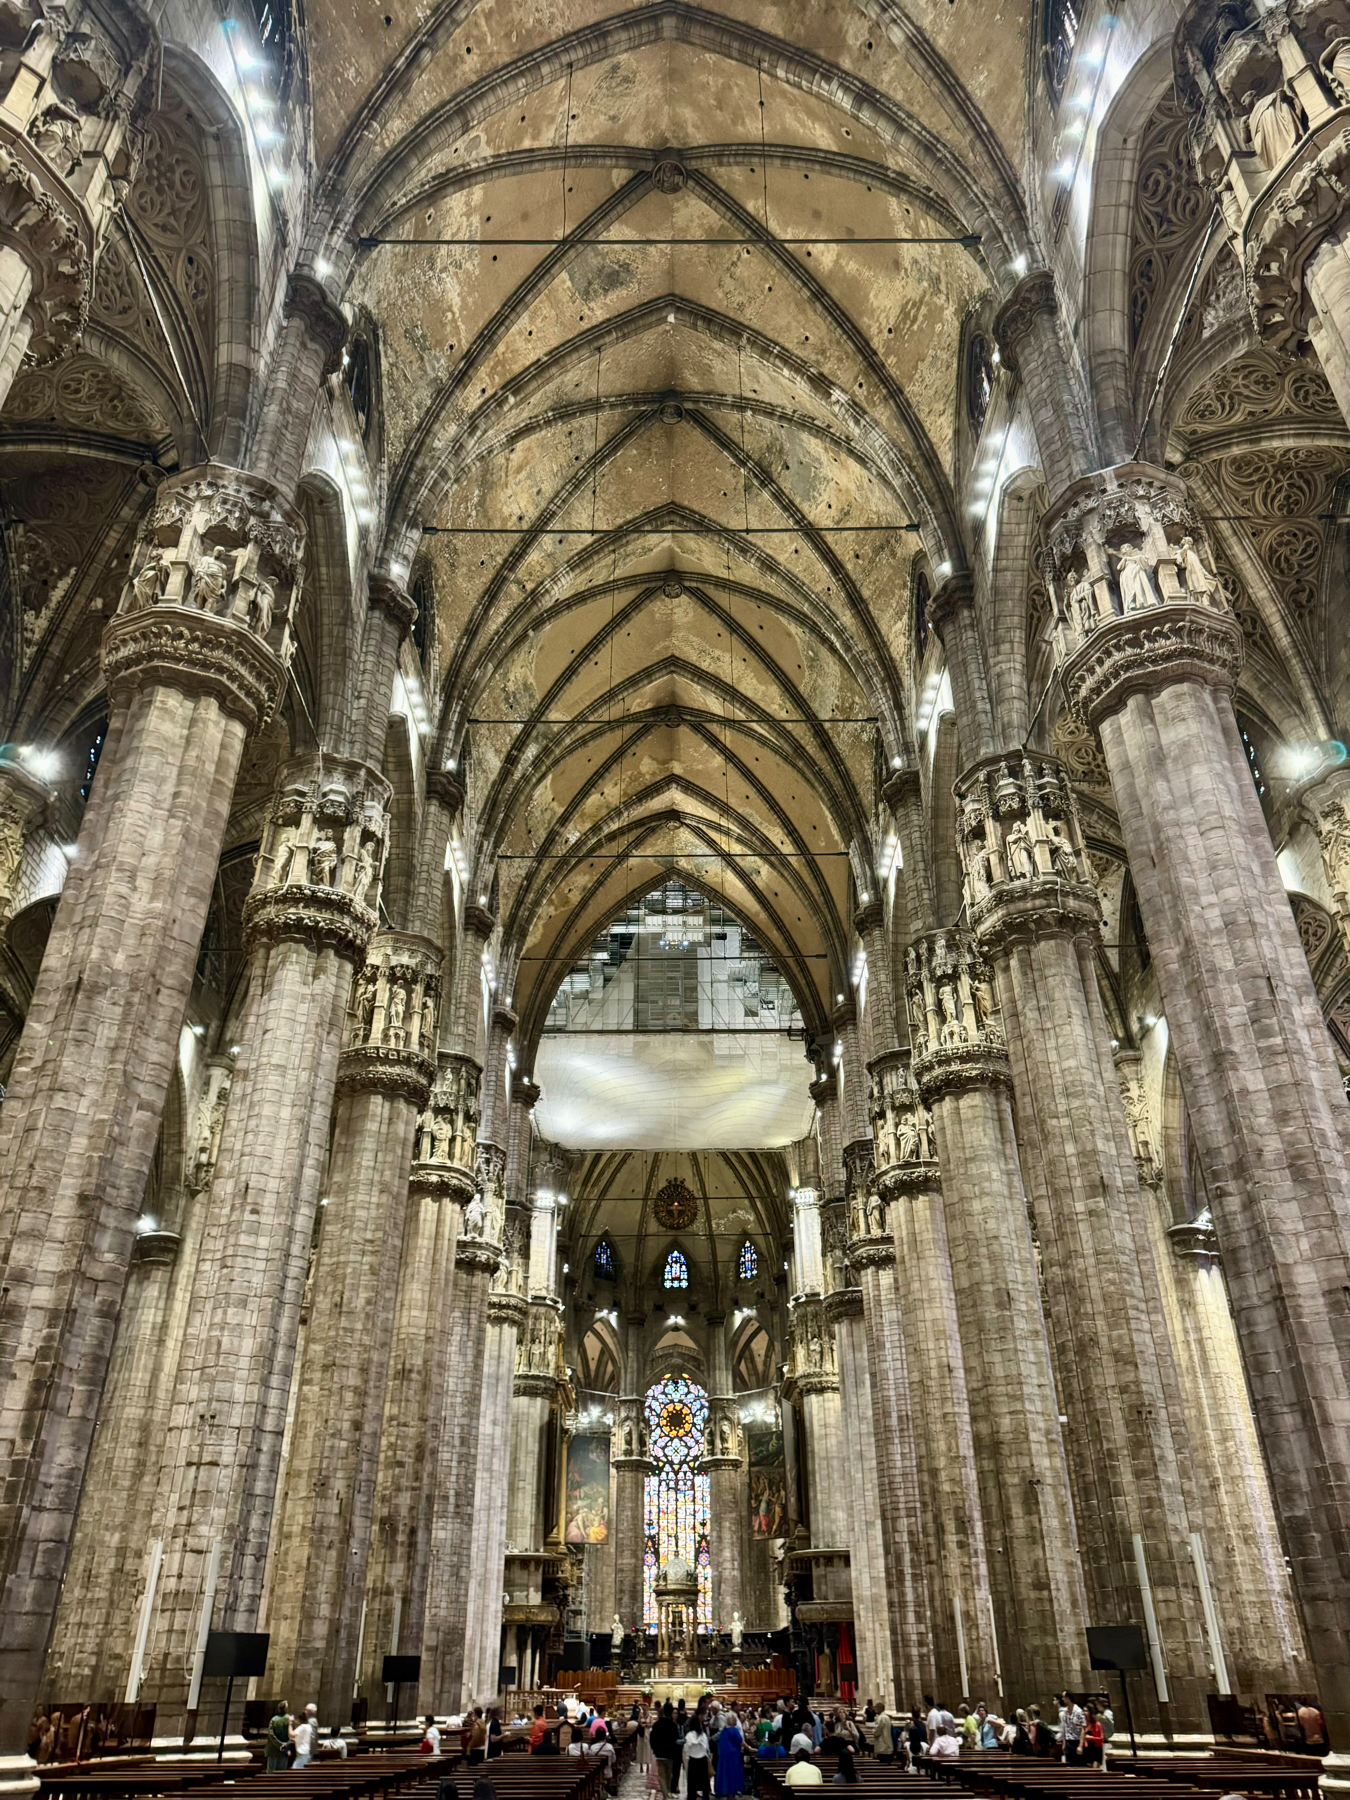 Interior of a grand Gothic cathedral with towering columns, arched ceilings, ornate architectural details, stained glass windows, and people seated in pews and walking around.